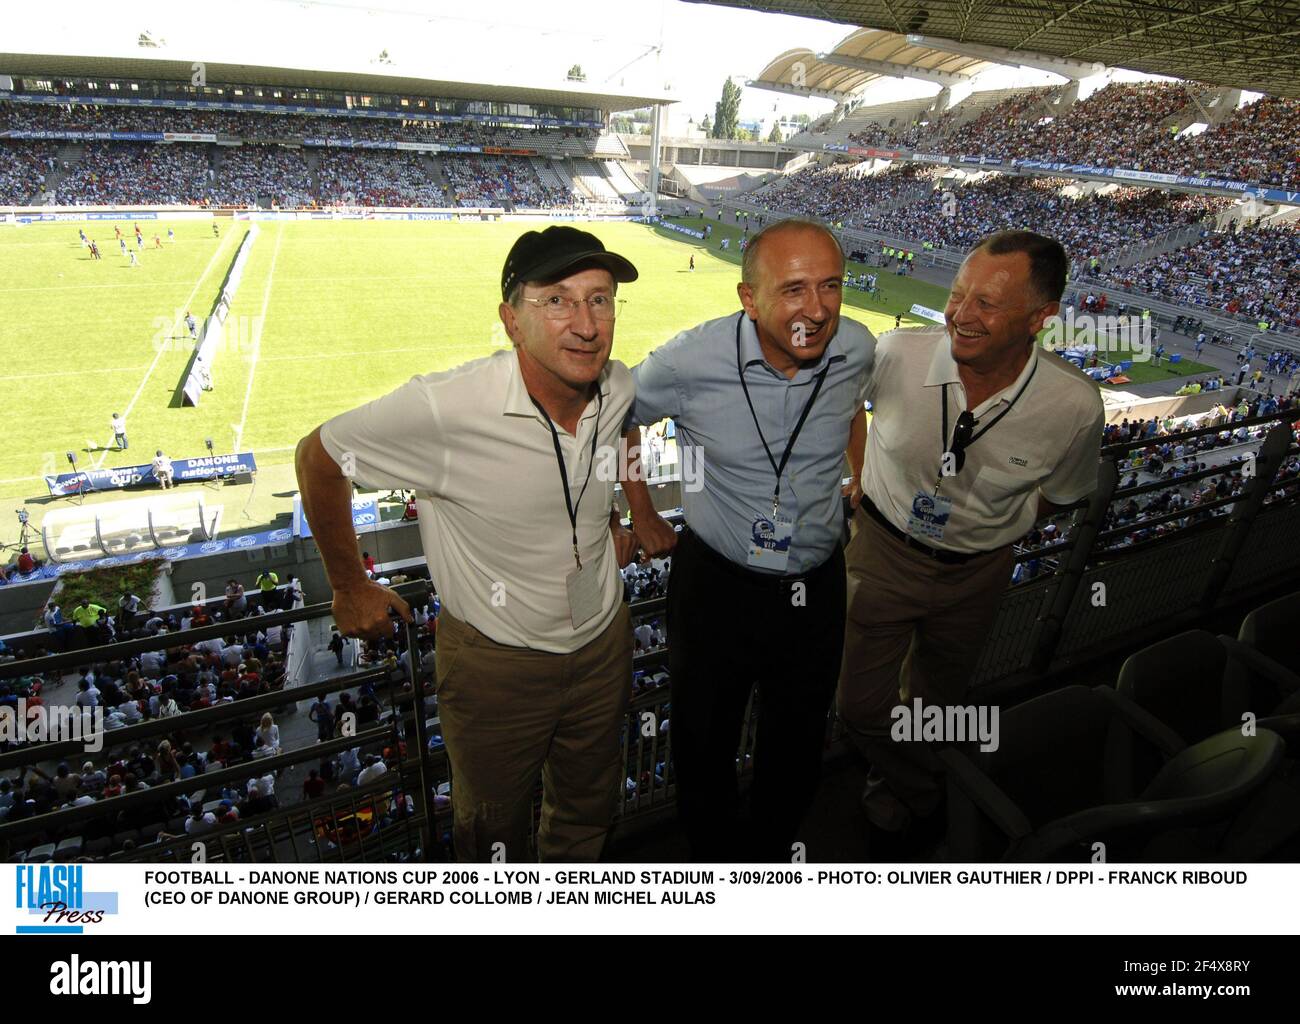 FOOTBALL - DANONE NATIONS CUP 2006 - LYON - GERLAND STADIUM - 3/09/2006 - PHOTO: OLIVIER GAUTHIER / DPPI - FRANCK RIBOUD (CEO OF DANONE GROUP) / GERARD COLLOMB / JEAN MICHEL AULAS Stock Photo